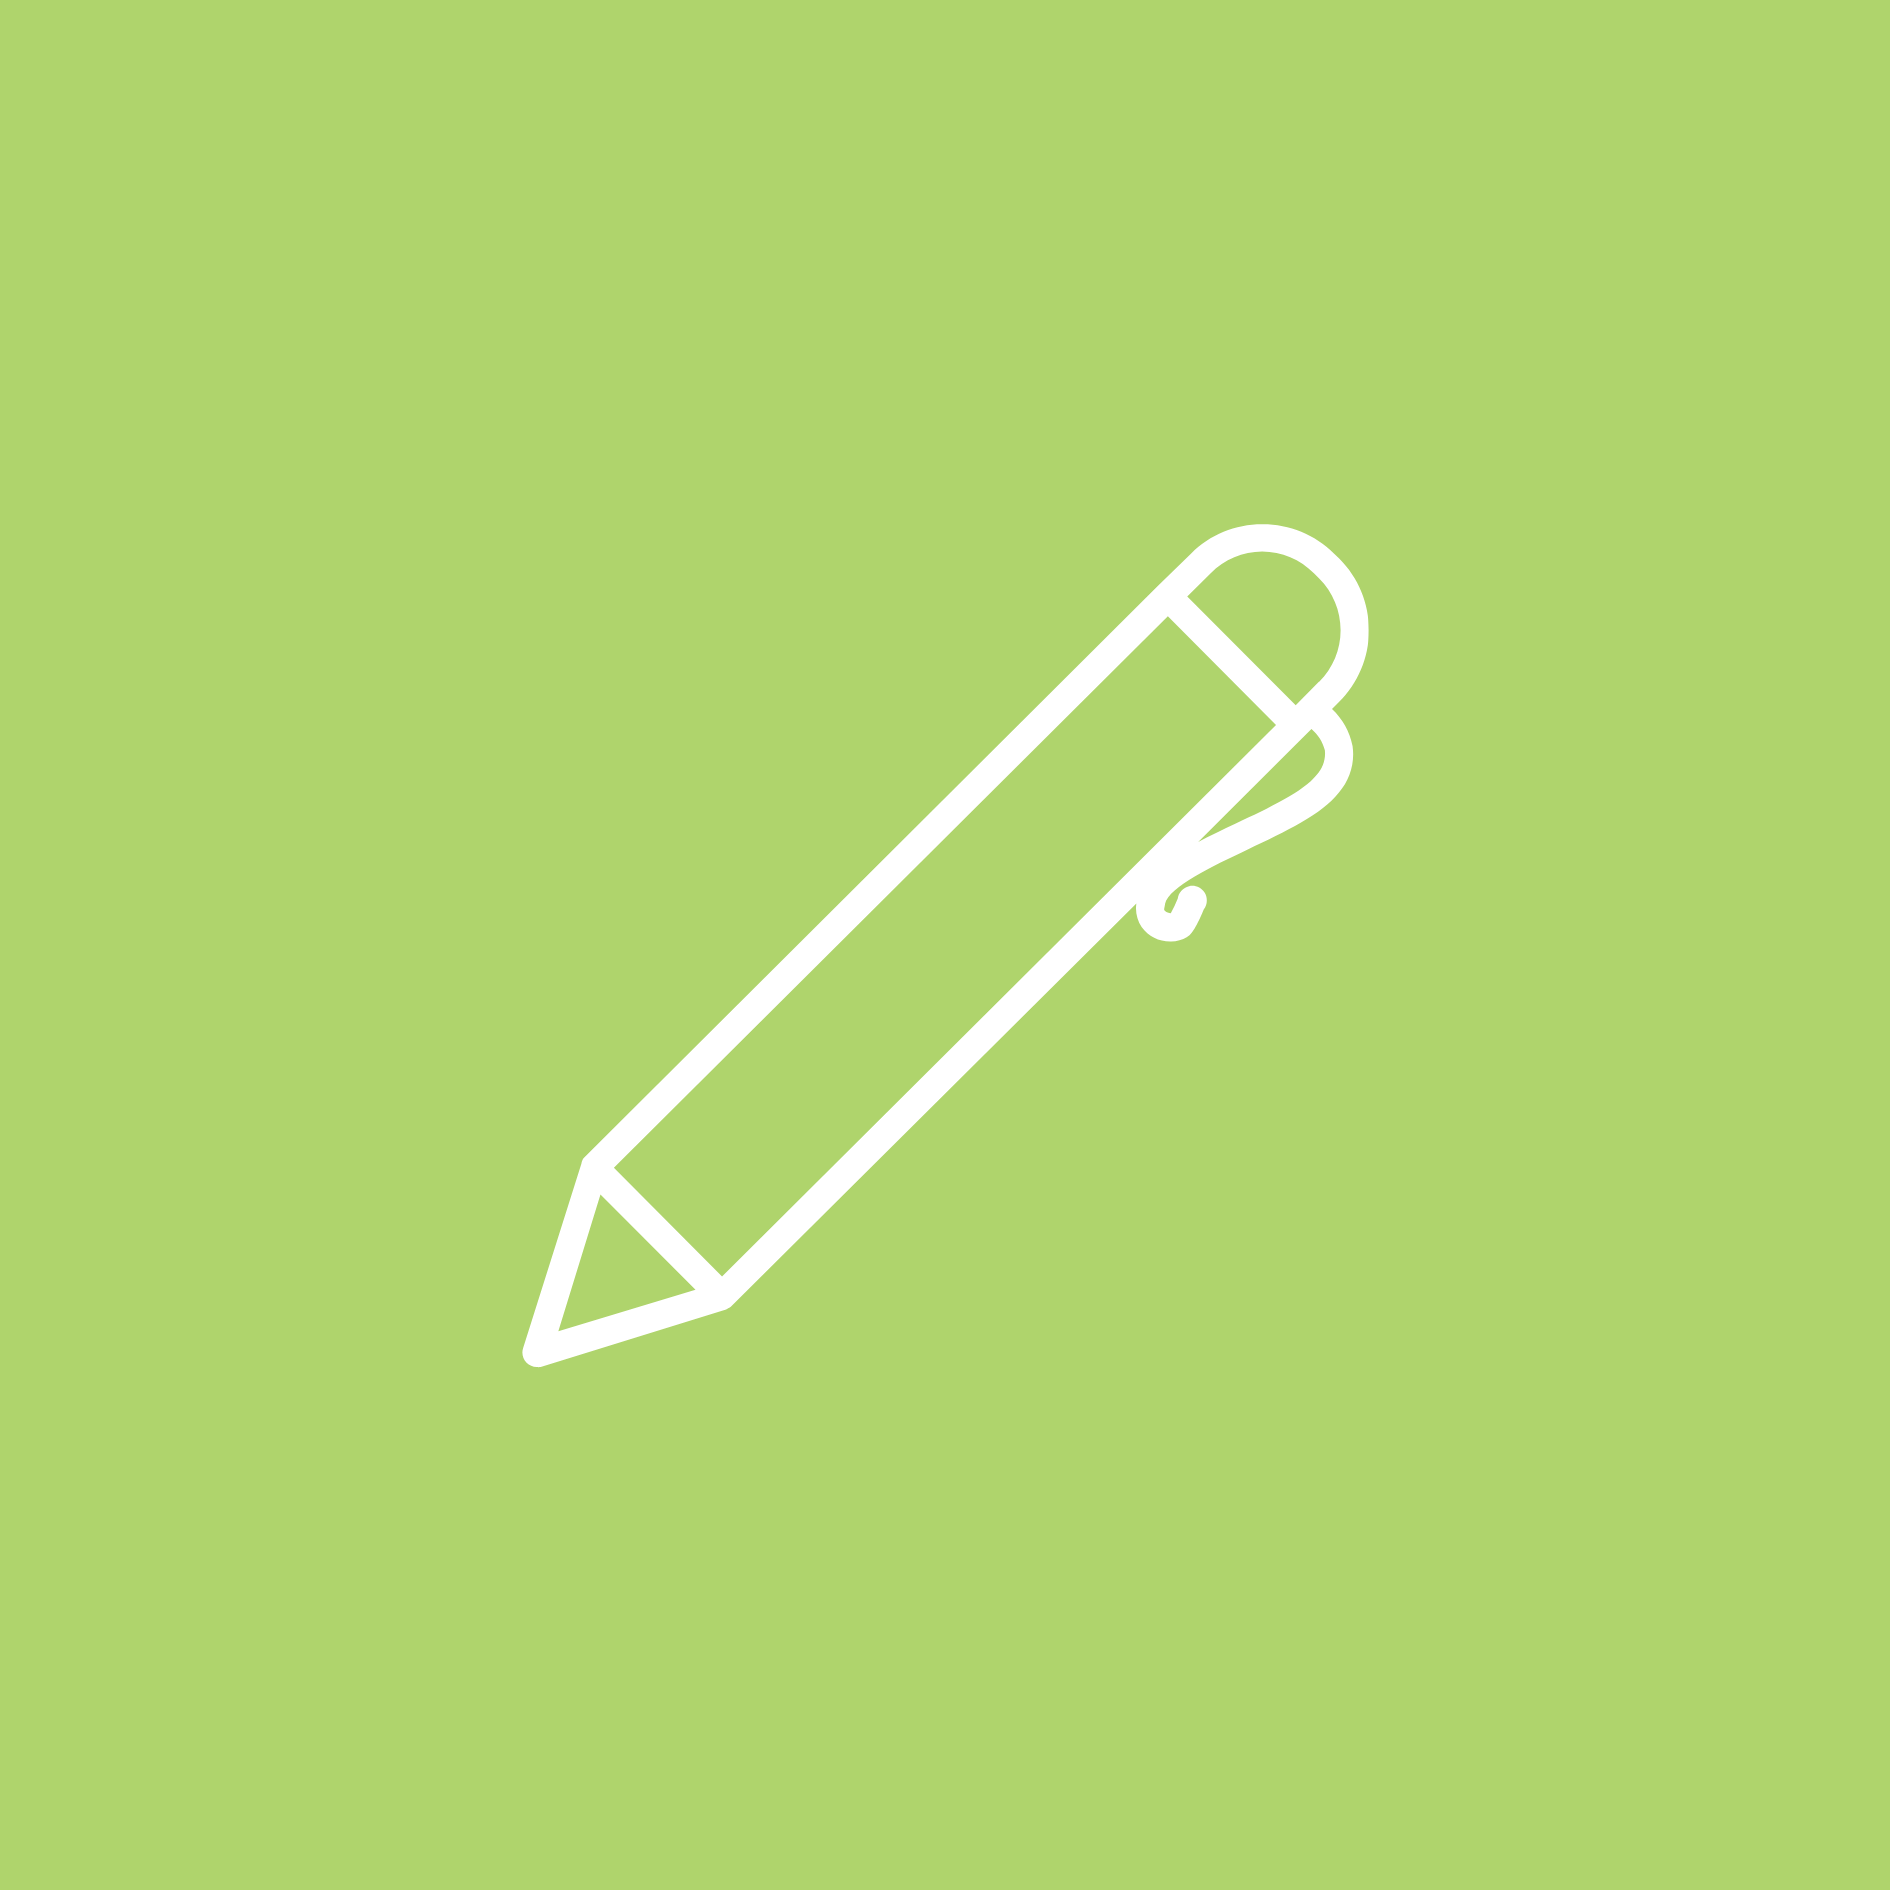 A white pen icon on a green background.